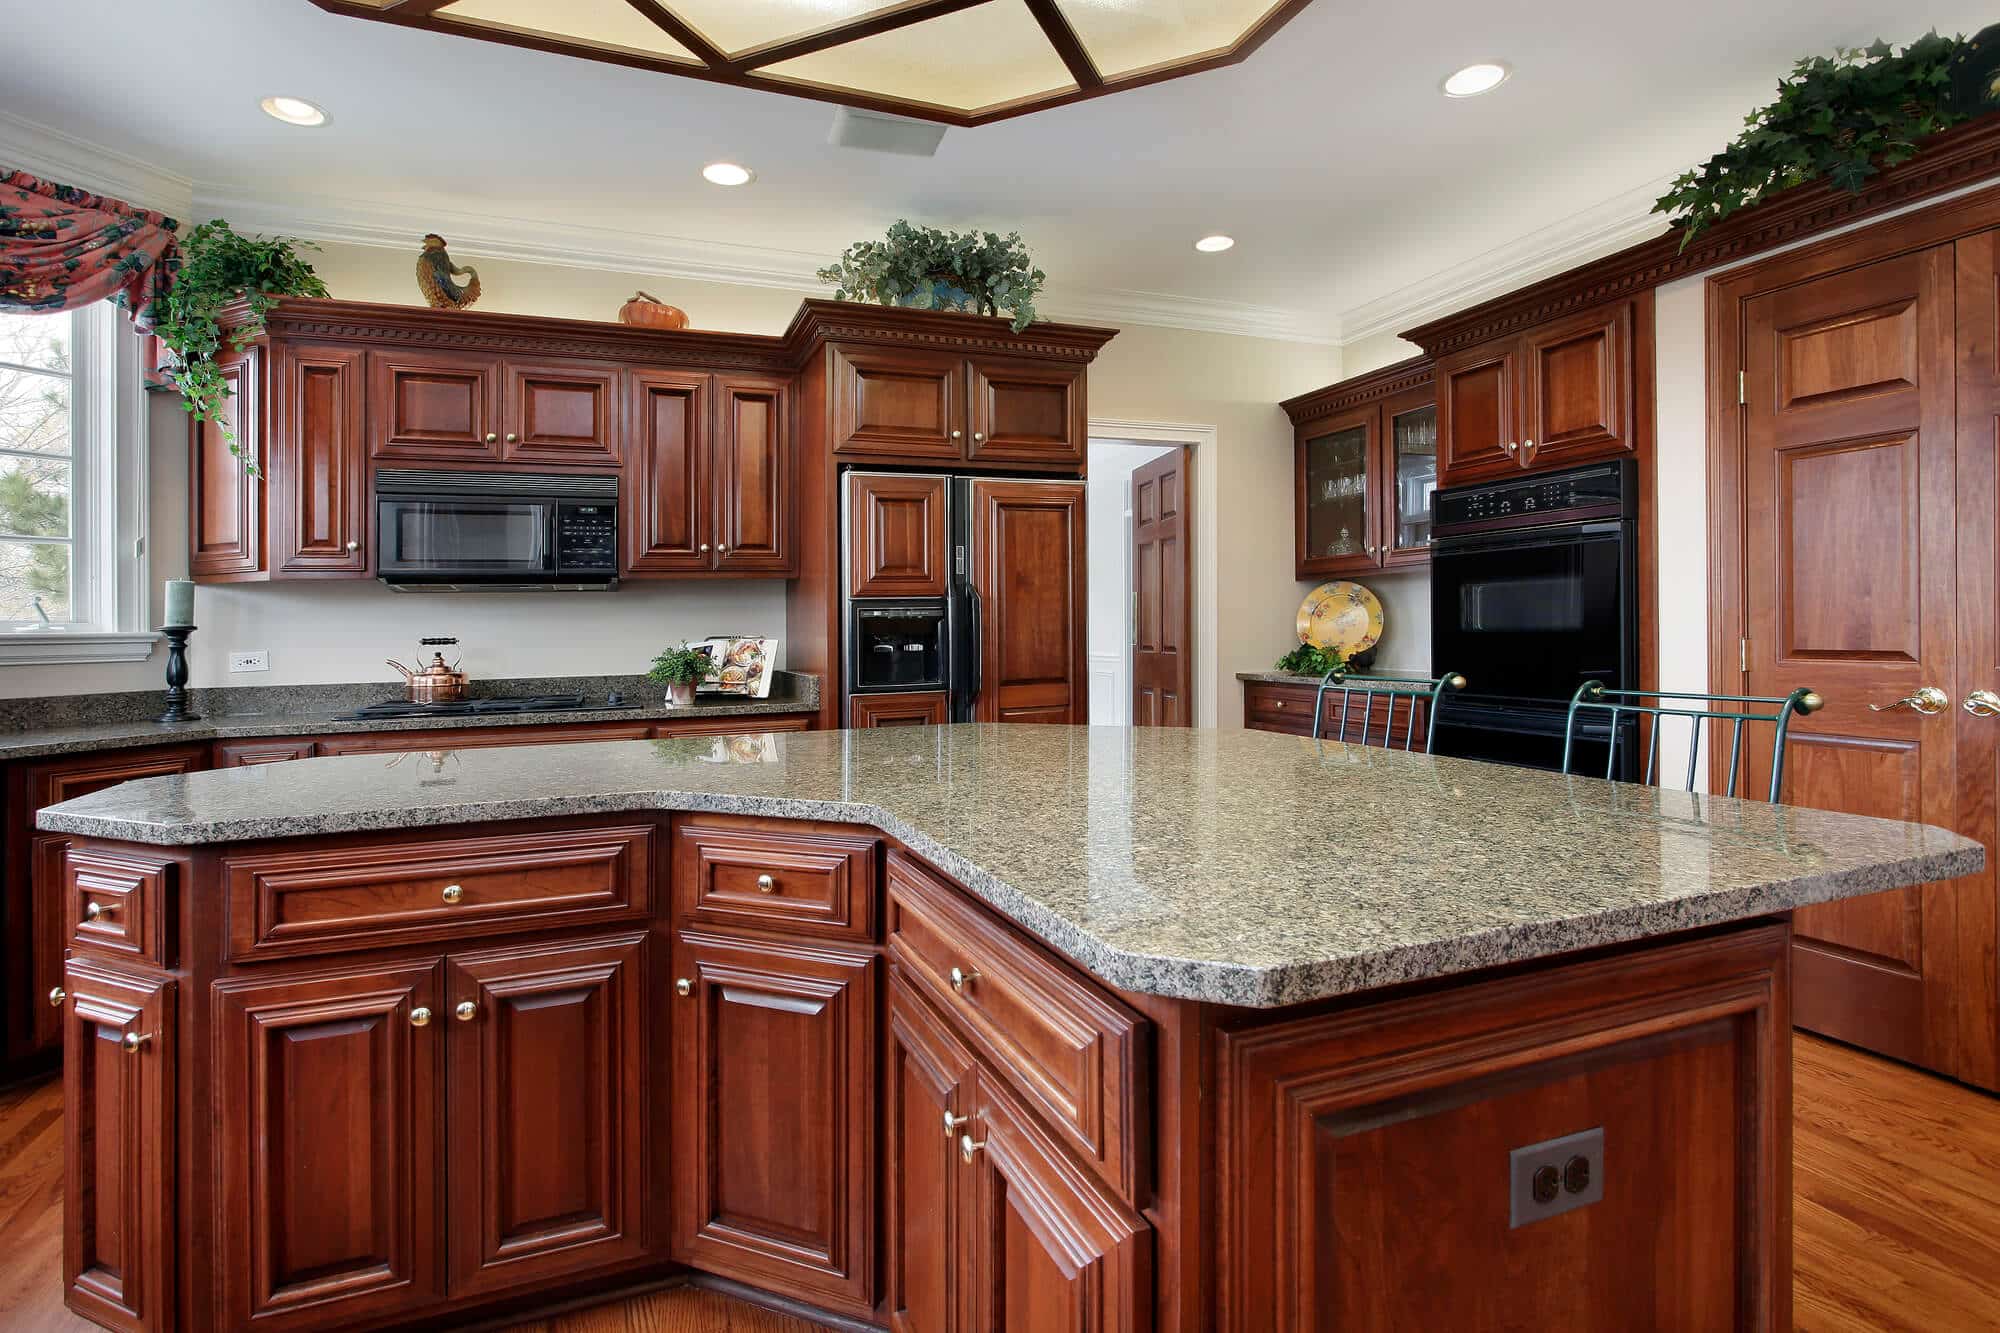 5 Ways to Protect Your Kitchen Cabinets & Sink From Water Damage